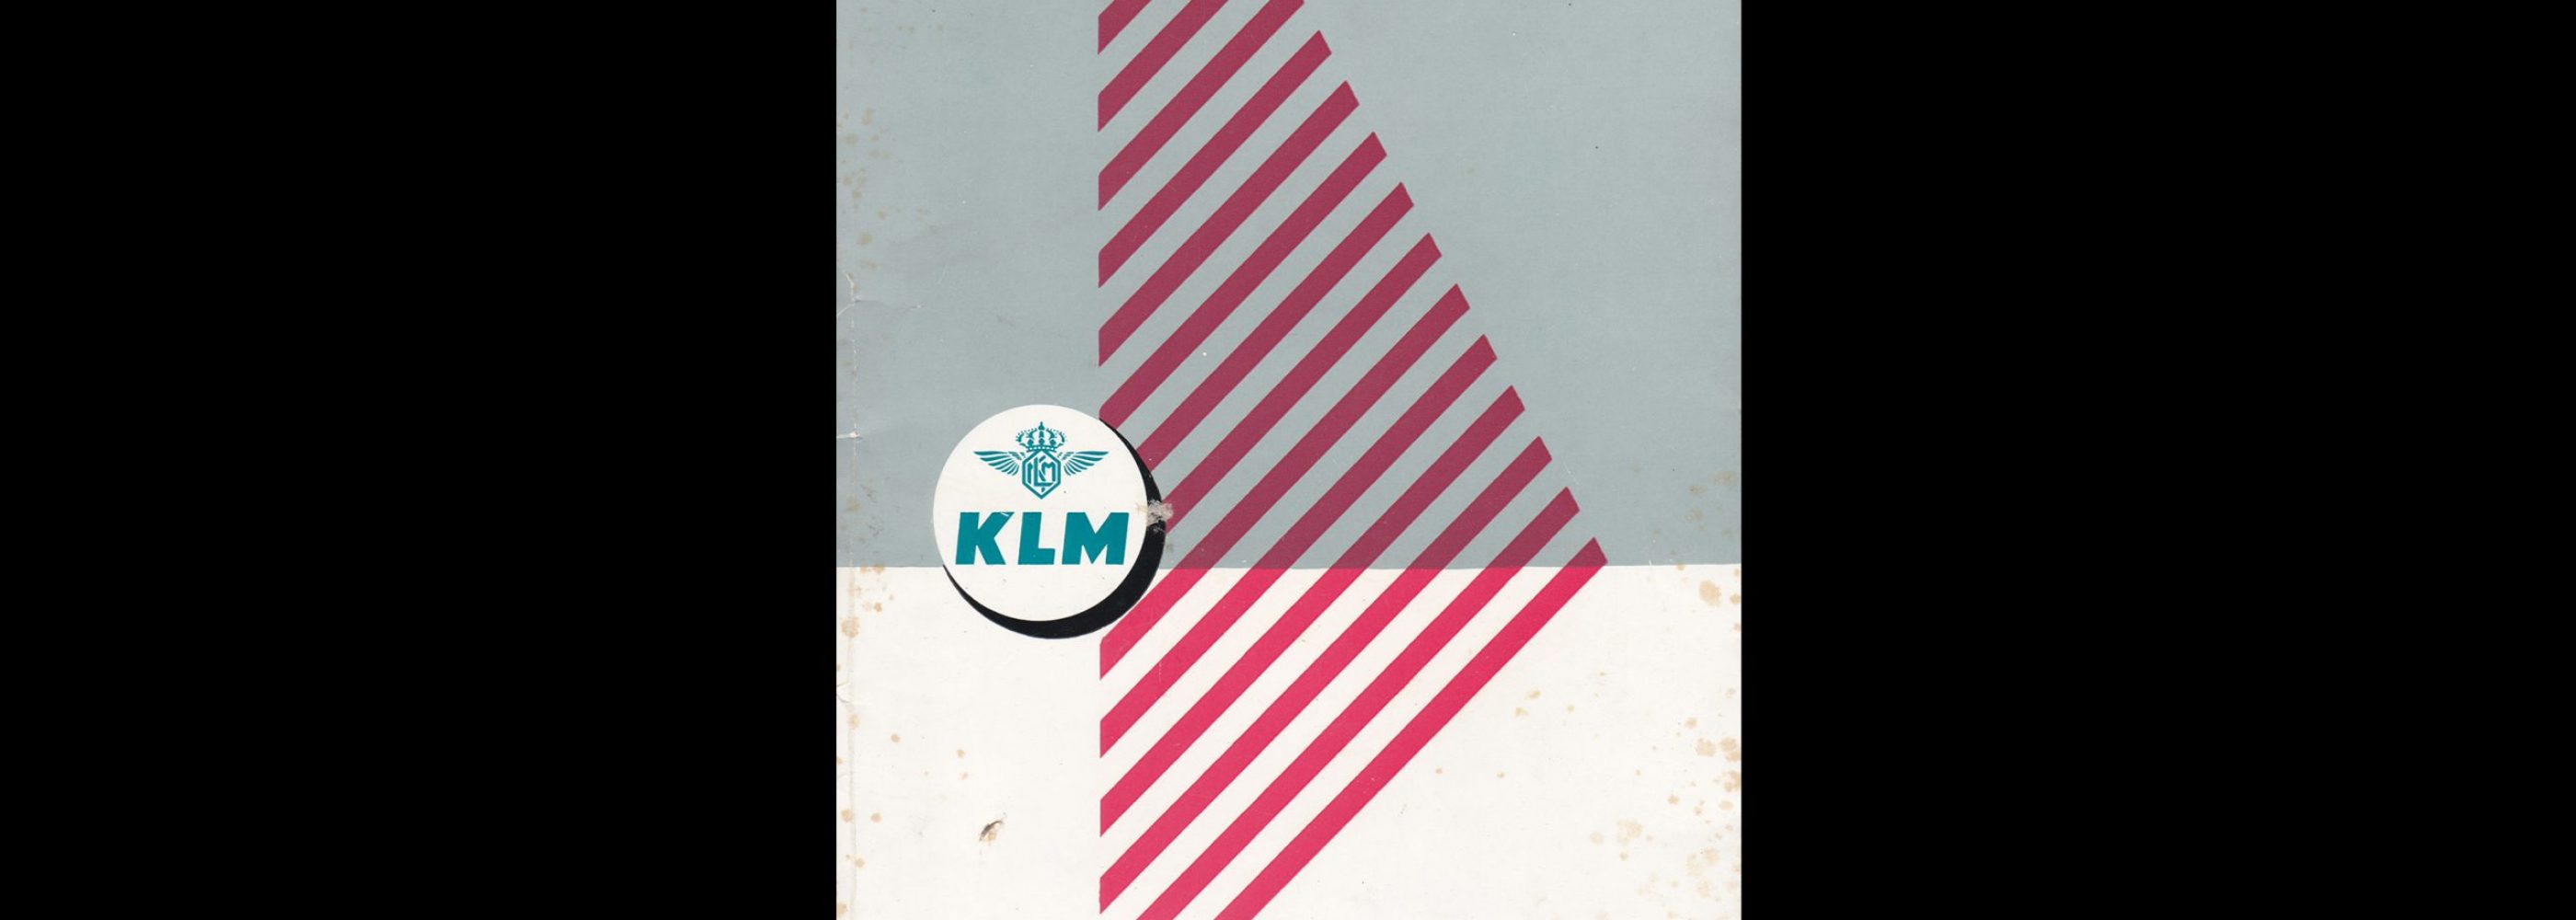 KLM Travel Documents Wallet, 1952. Designed by Otto Treumann